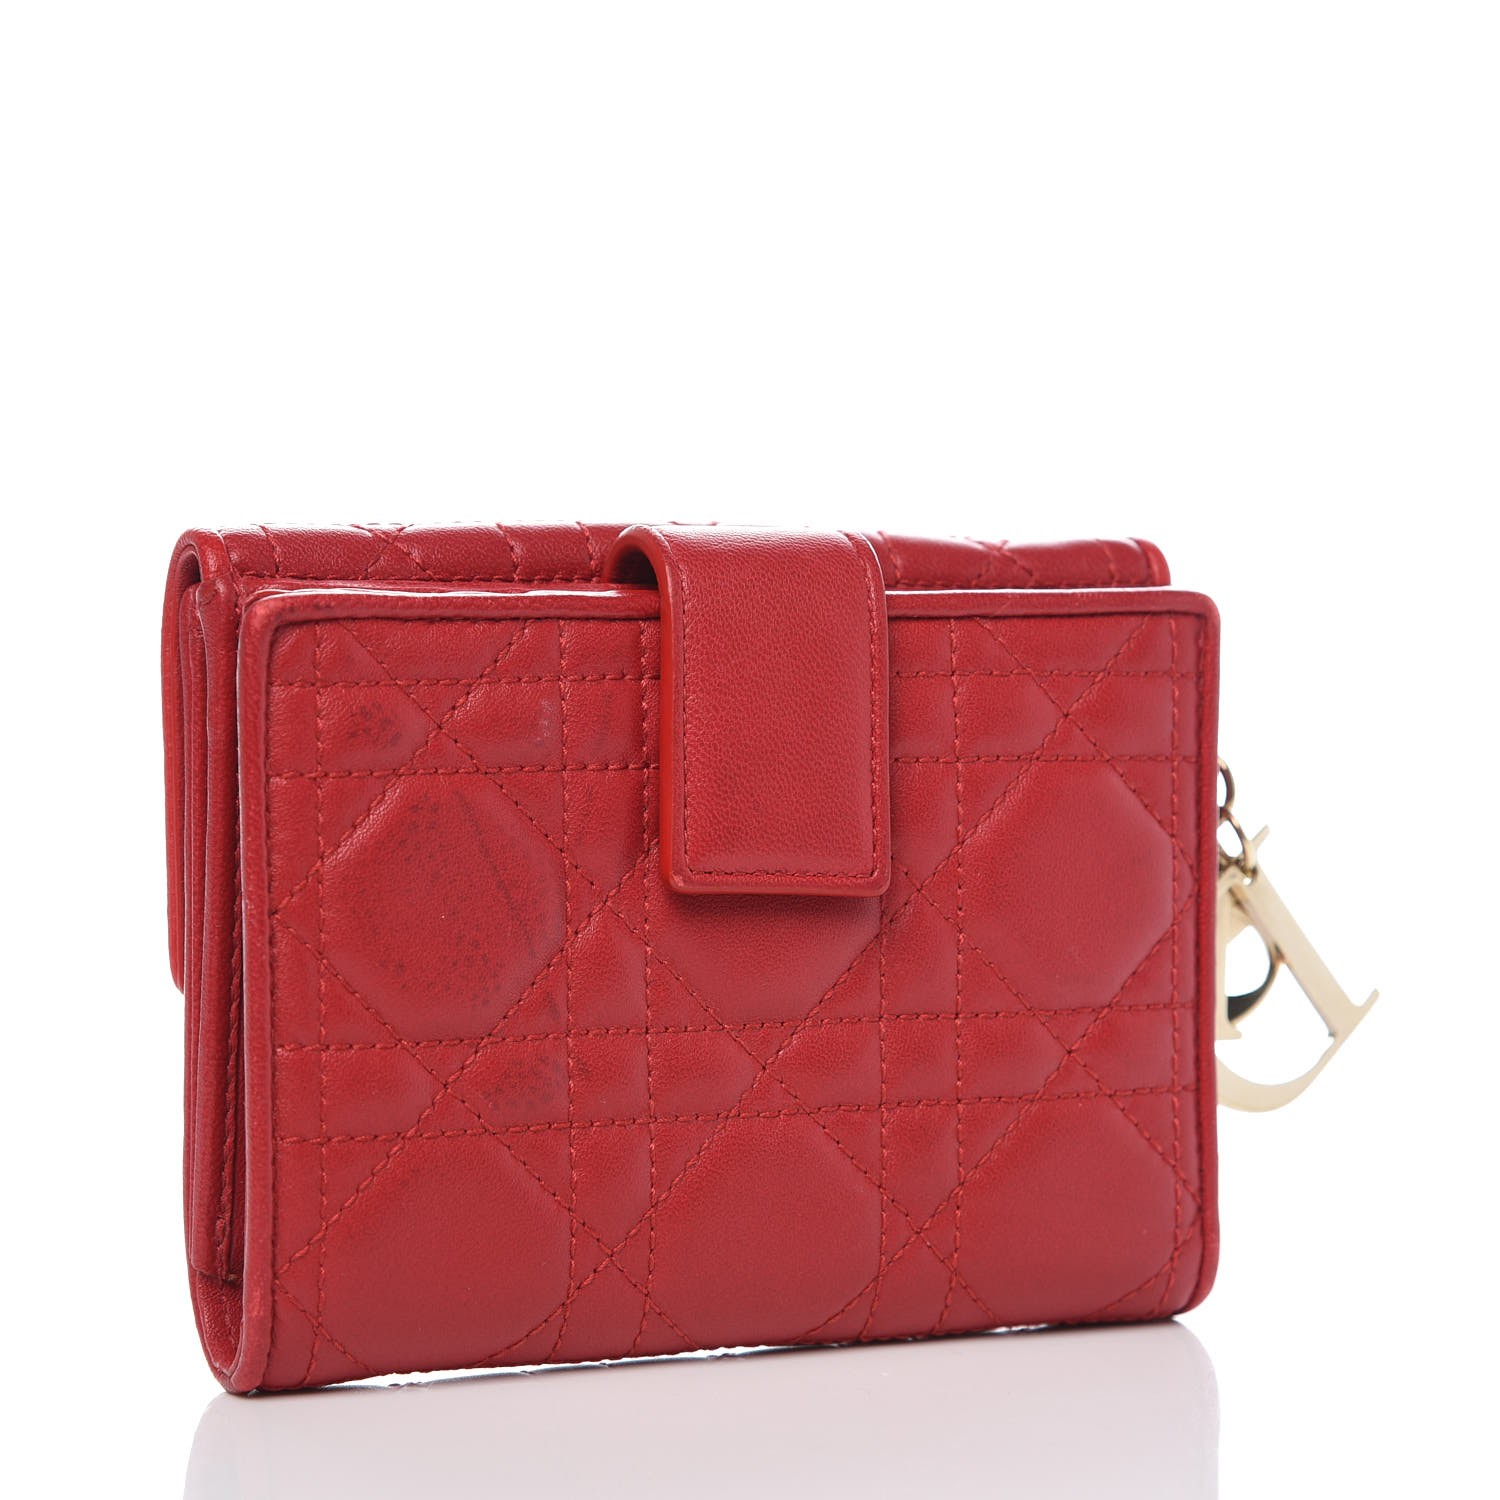 CHRISTIAN DIOR Lambskin Cannage Lady Dior Compact Wallet Rusty Red 318132